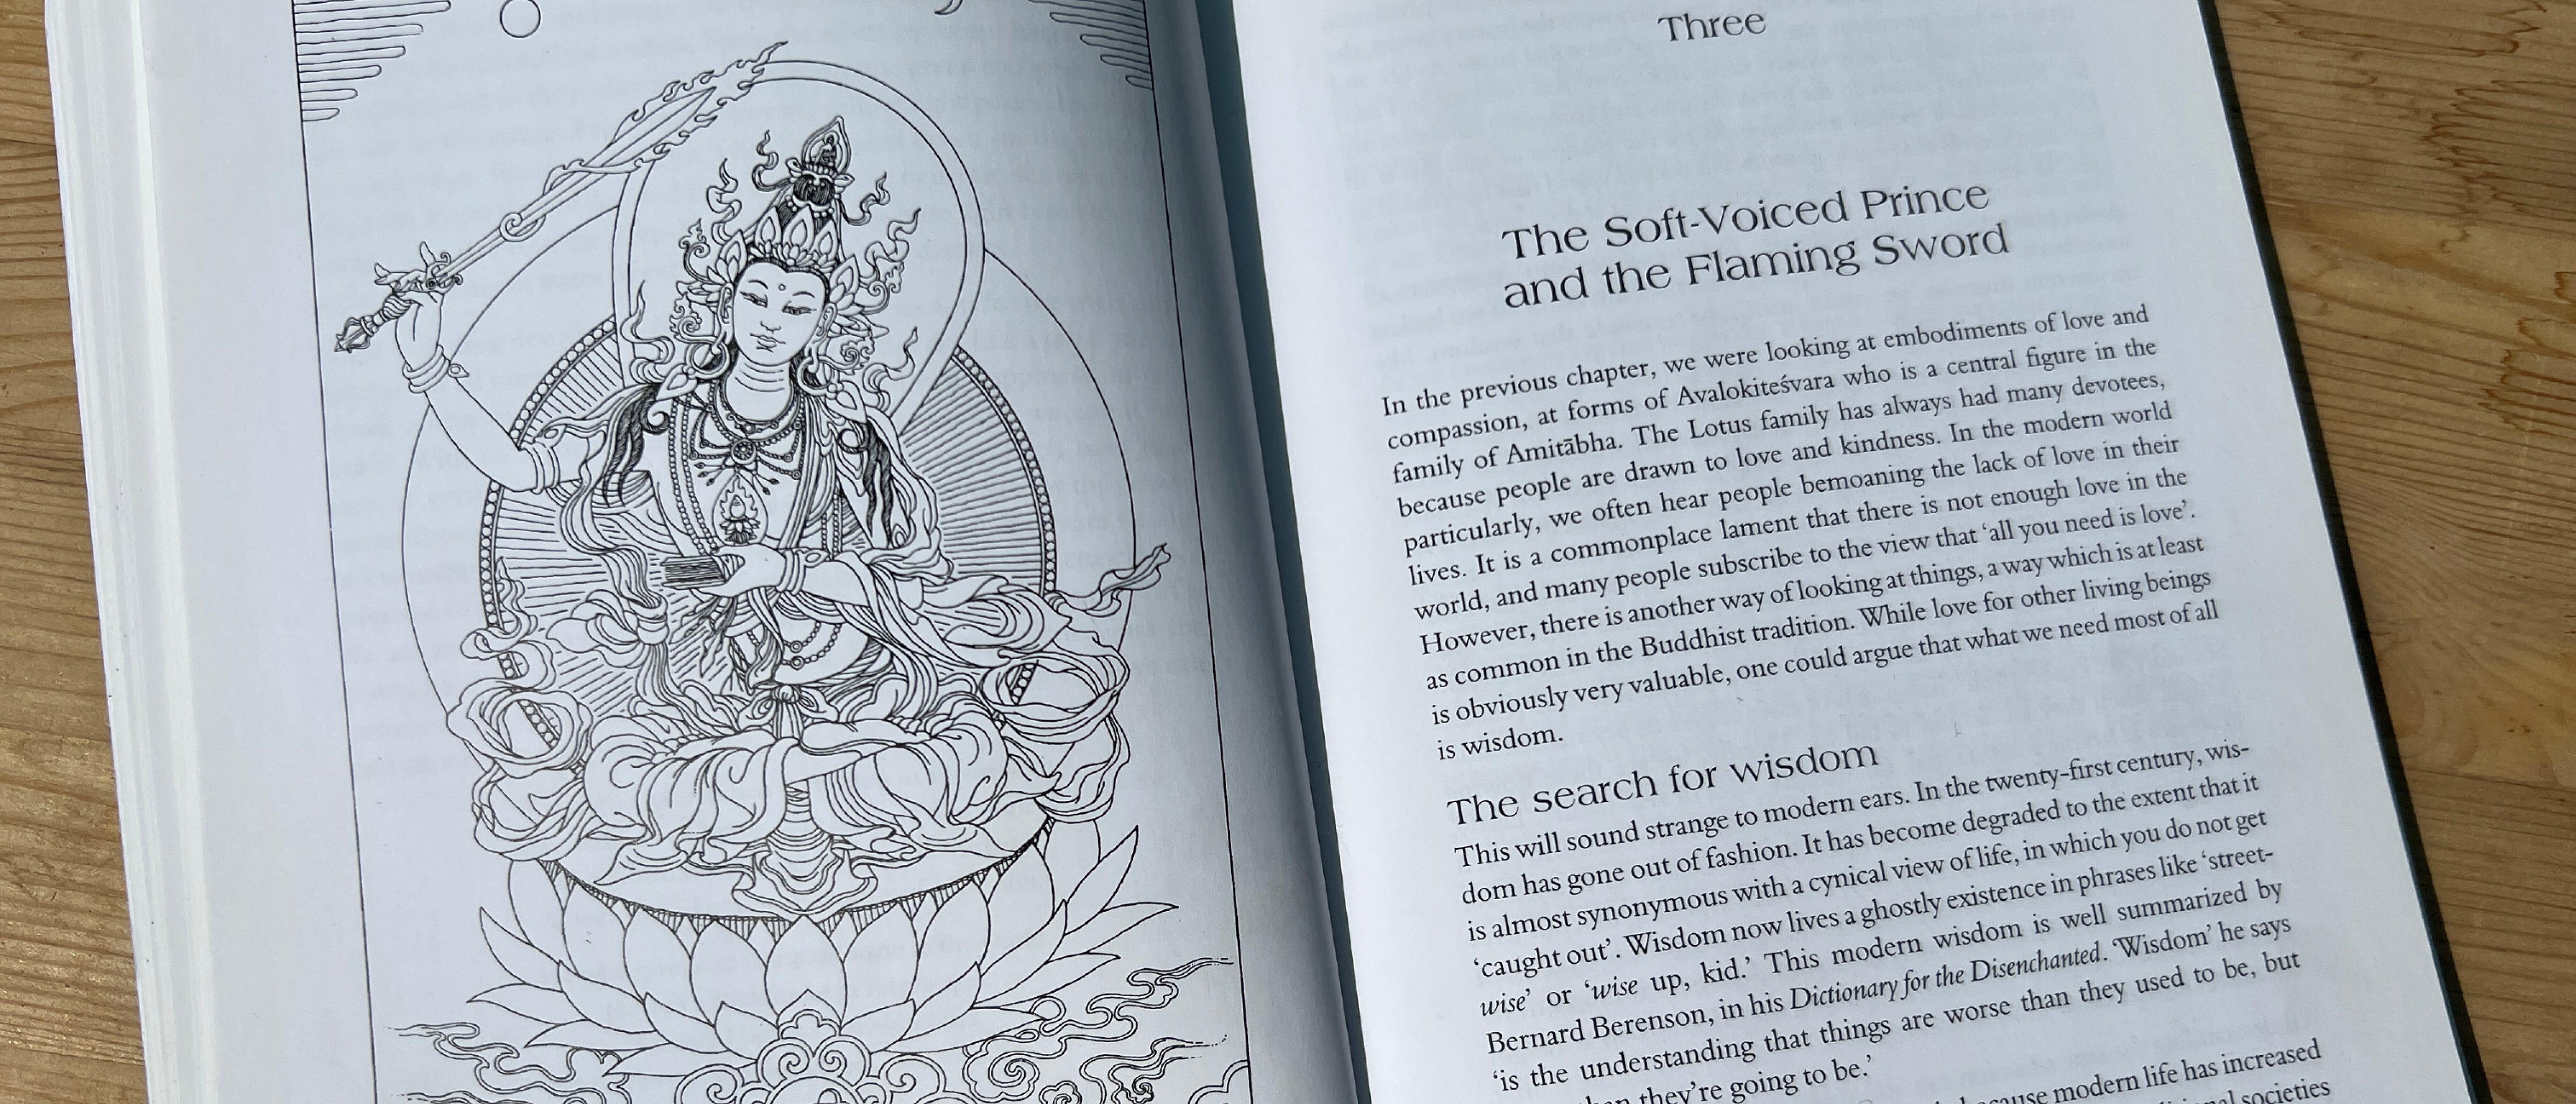 Photo taken of a book open to an image plate and start of a chapter. The image plate, on the left page, shows a detailed line drawing Thangka of the Bodhisattva Manjushri adorned in jewelery, holding aloft a flaming sword. The right hand page indicates this is the third chapter of the book, which is titled The Soft-Voiced Prince and the Flaming Sword. 